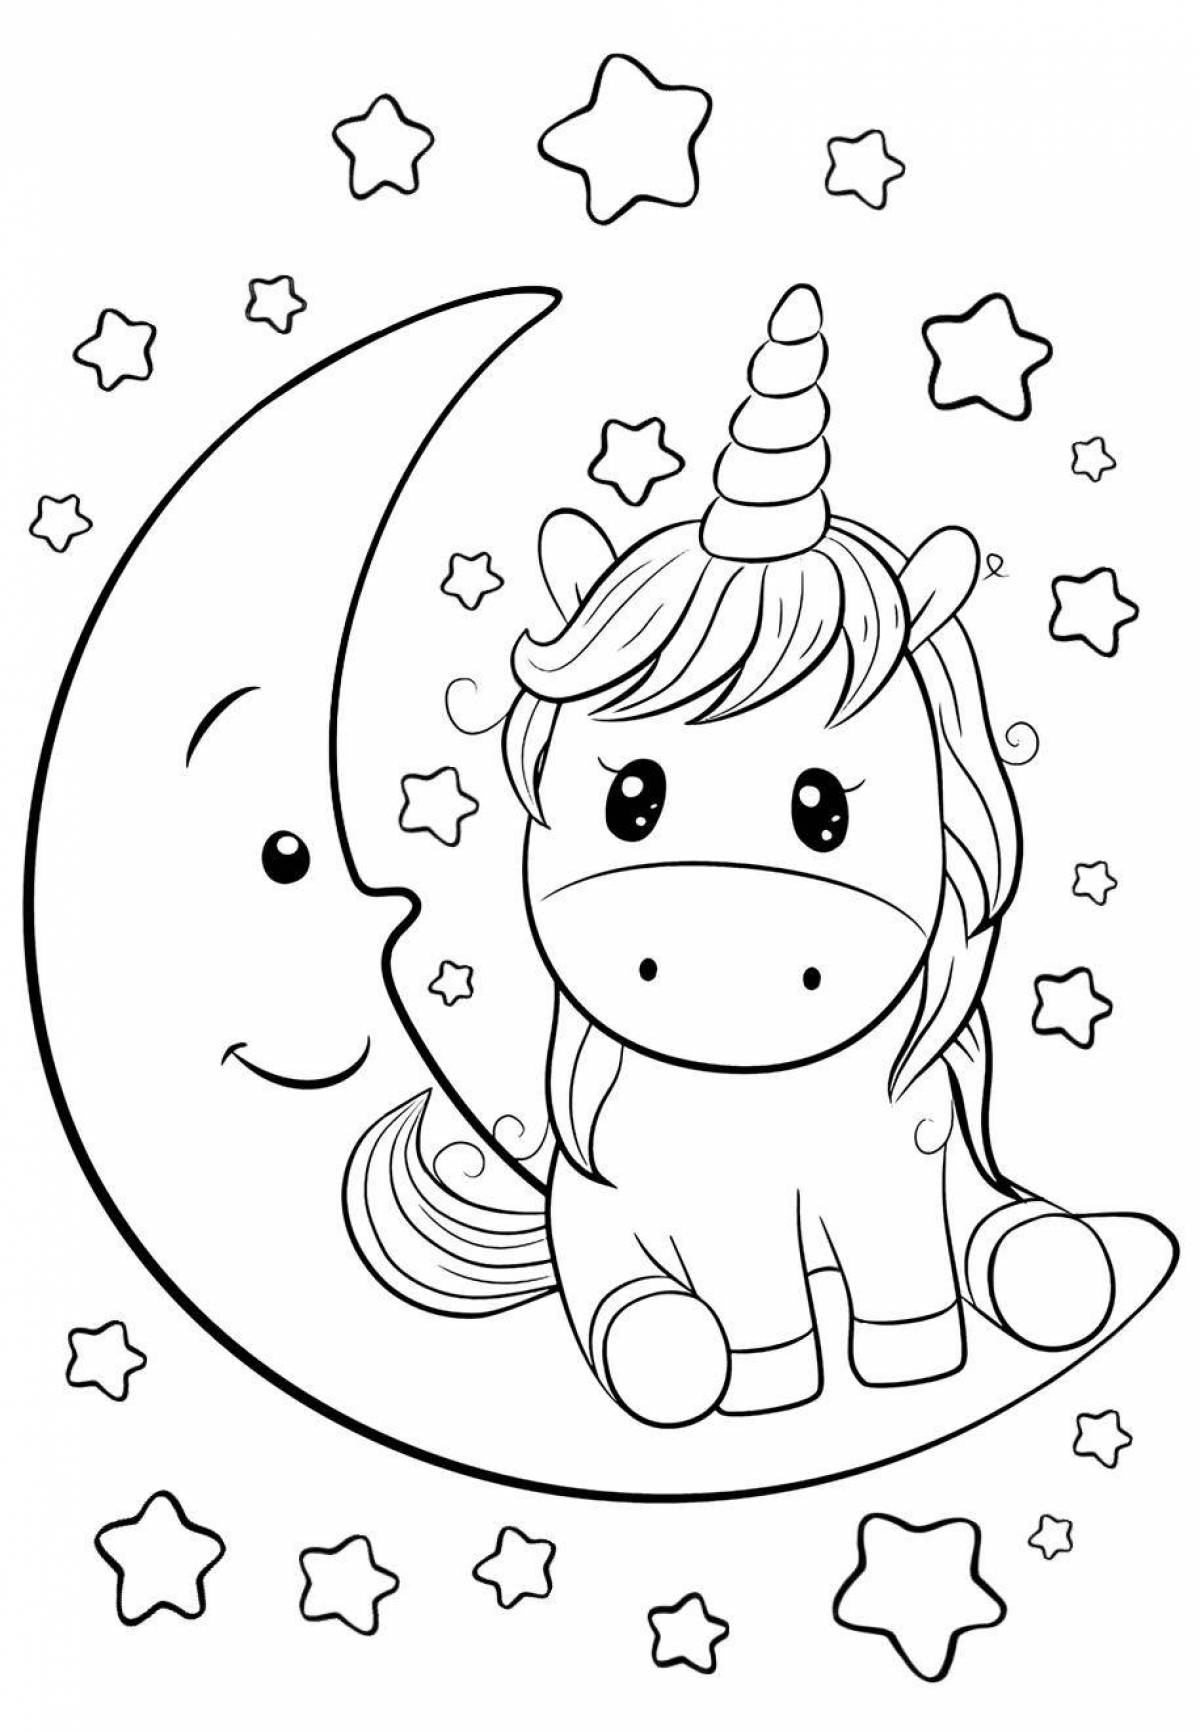 Awesome unicorn coloring book for kids